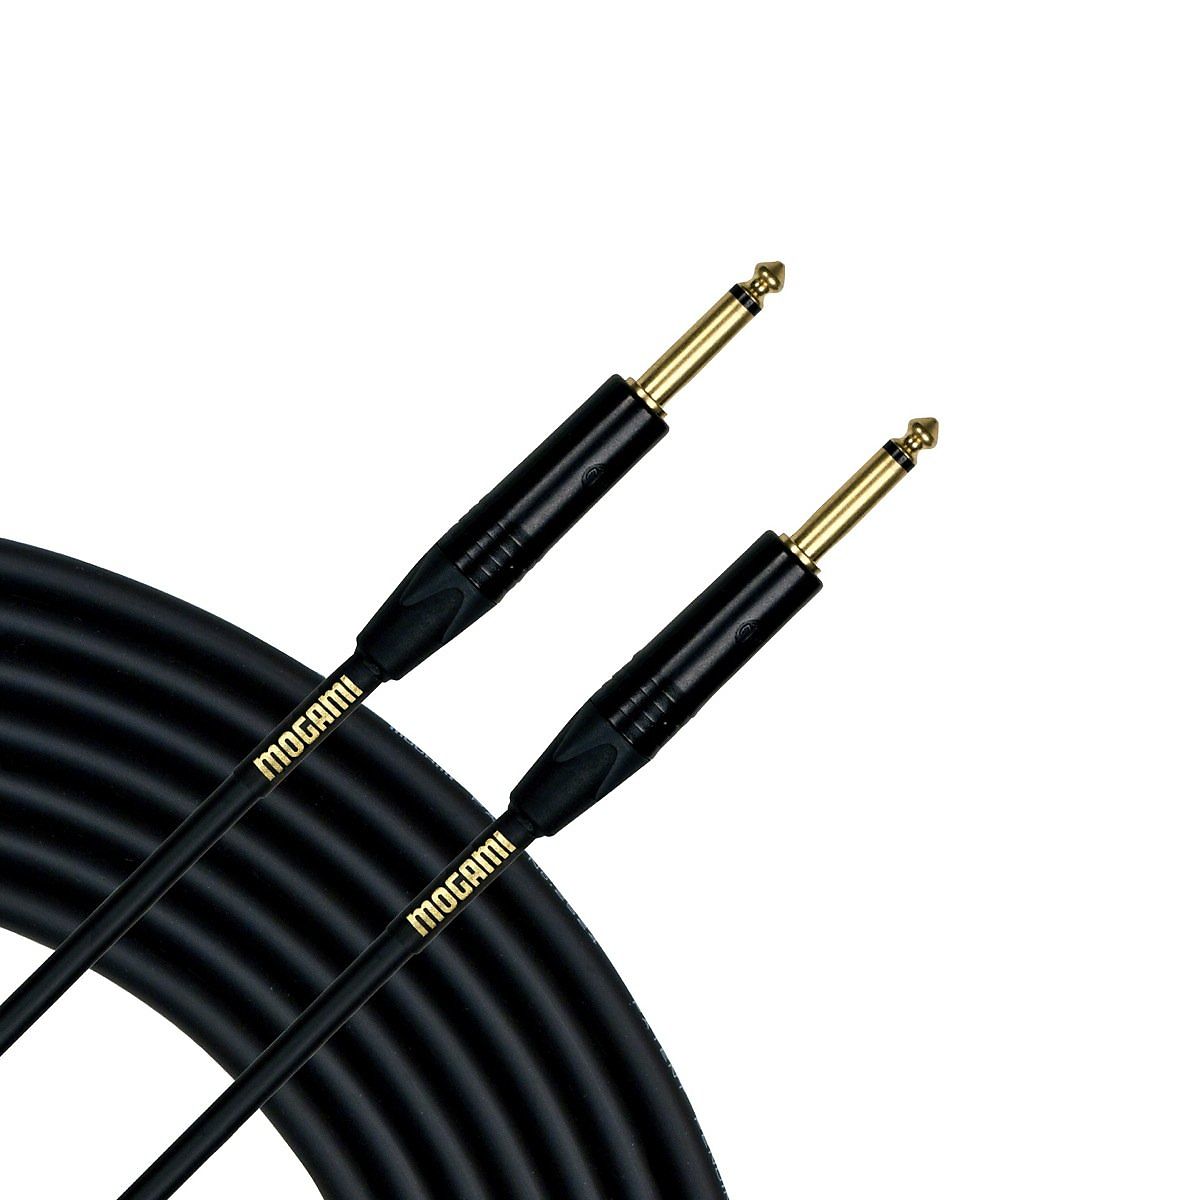 Mogami Gold Guitar/Instrument Cable, 18 Foot